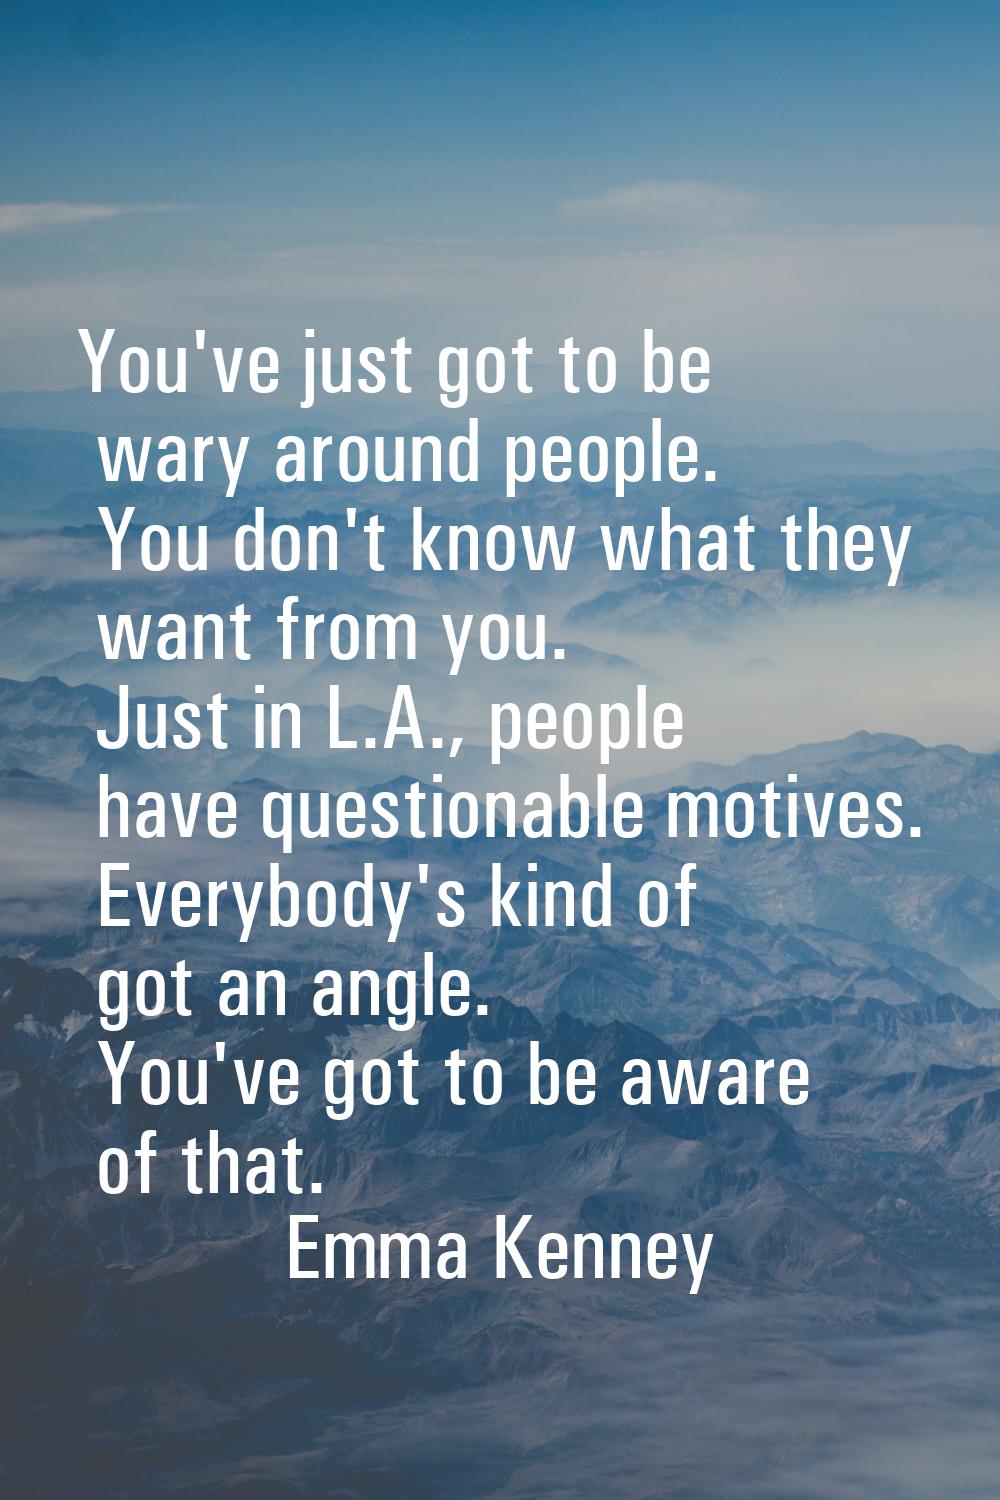 You've just got to be wary around people. You don't know what they want from you. Just in L.A., peo